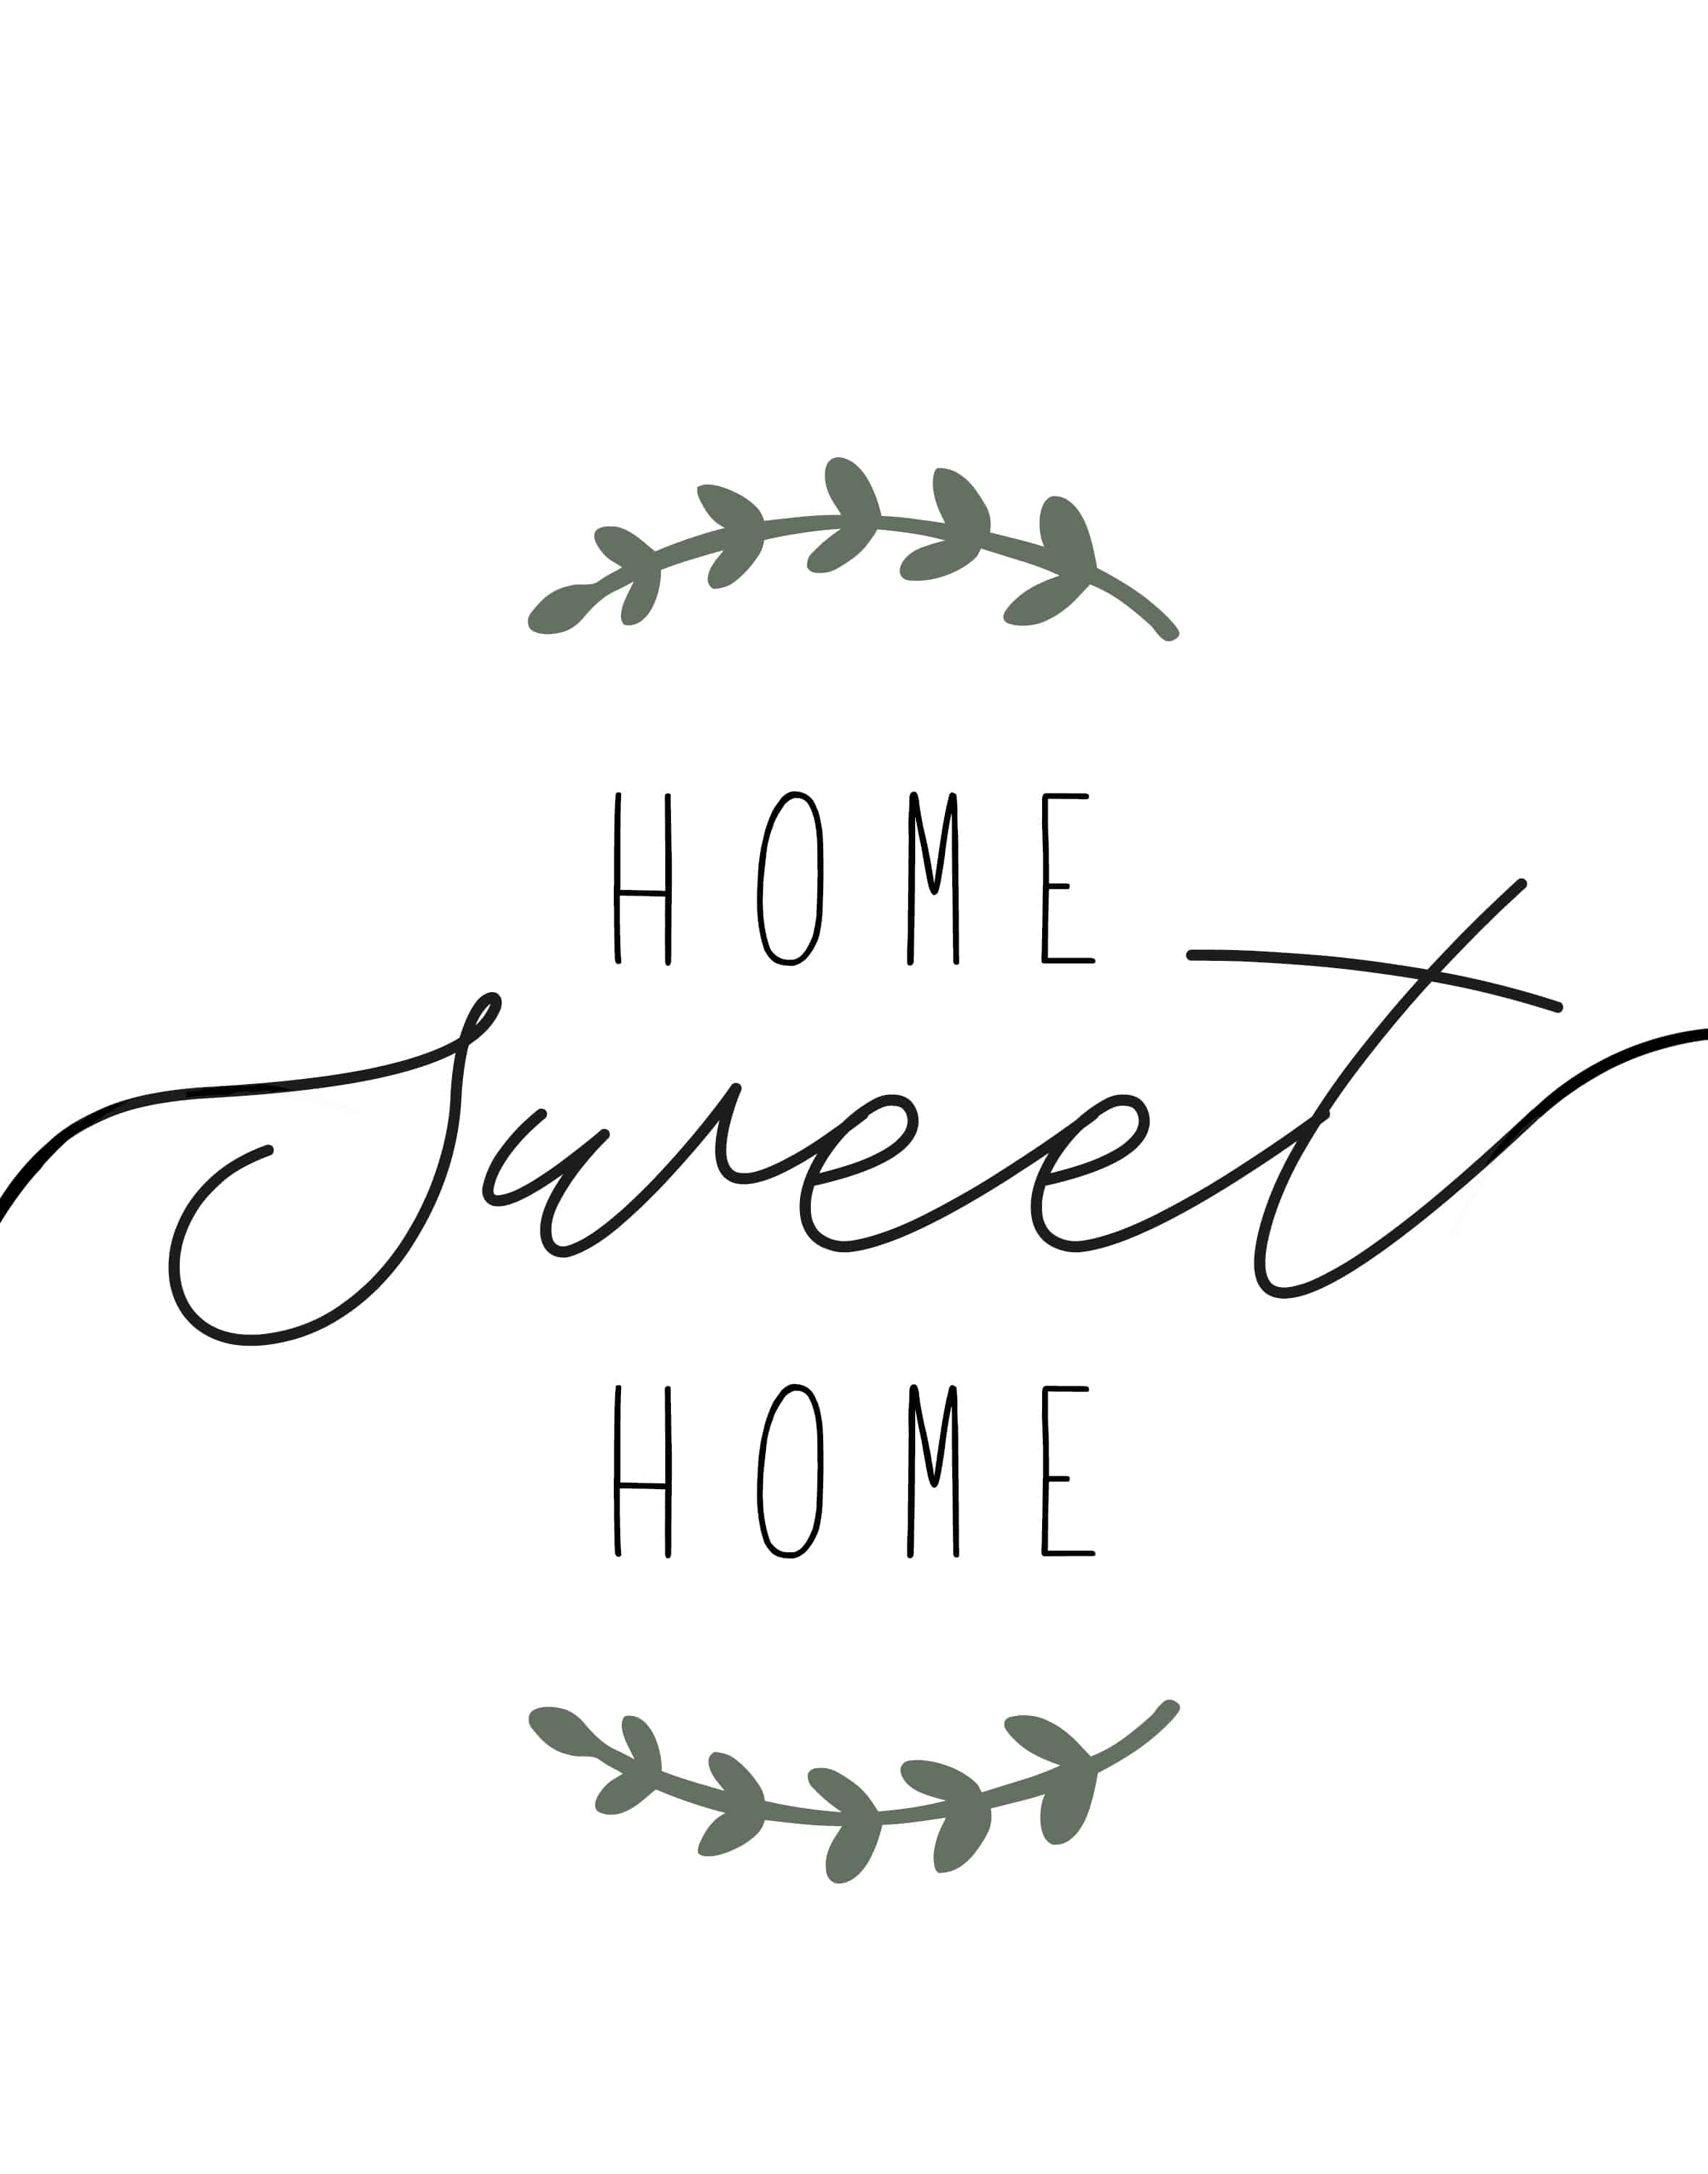 welcome-home-printable-art-entryway-decor-home-quote-print-entrance